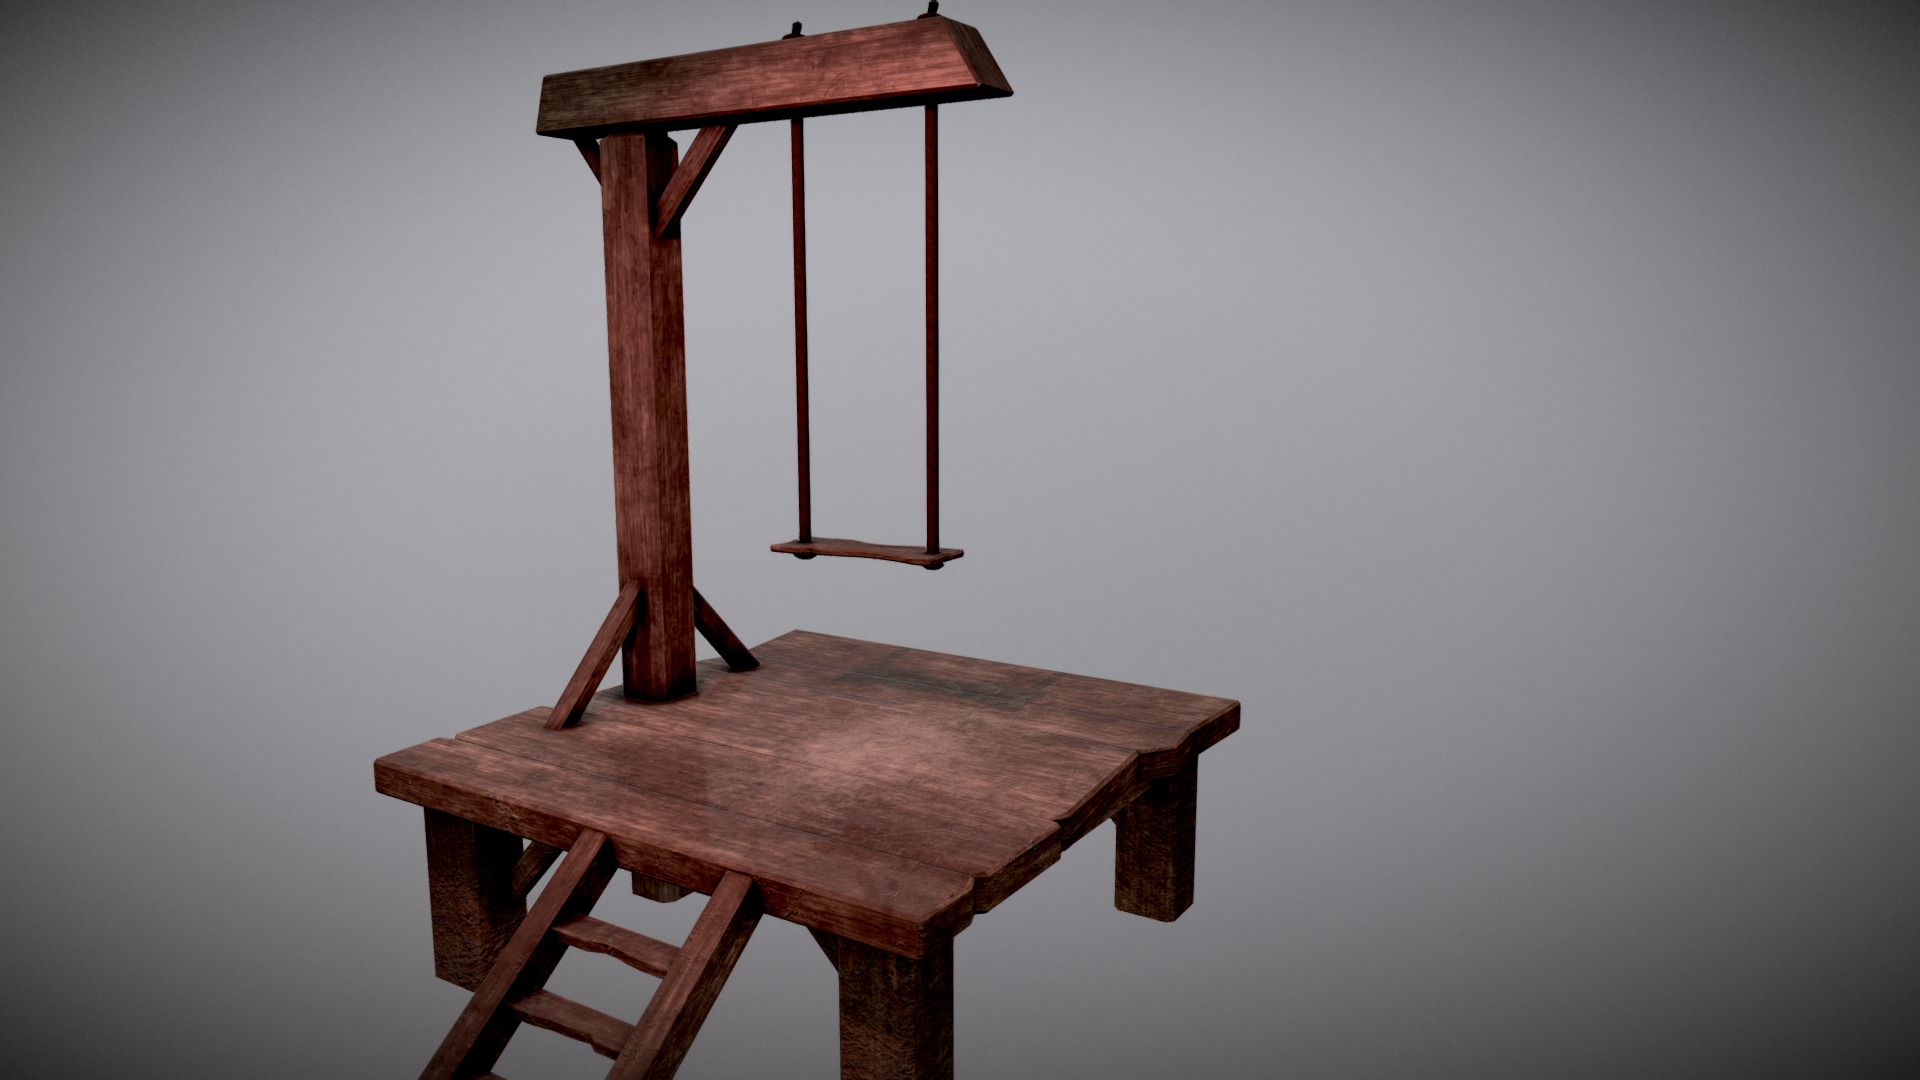 3D model Death Swing - This is a 3D model of the Death Swing. The 3D model is about a wooden table with a chair.